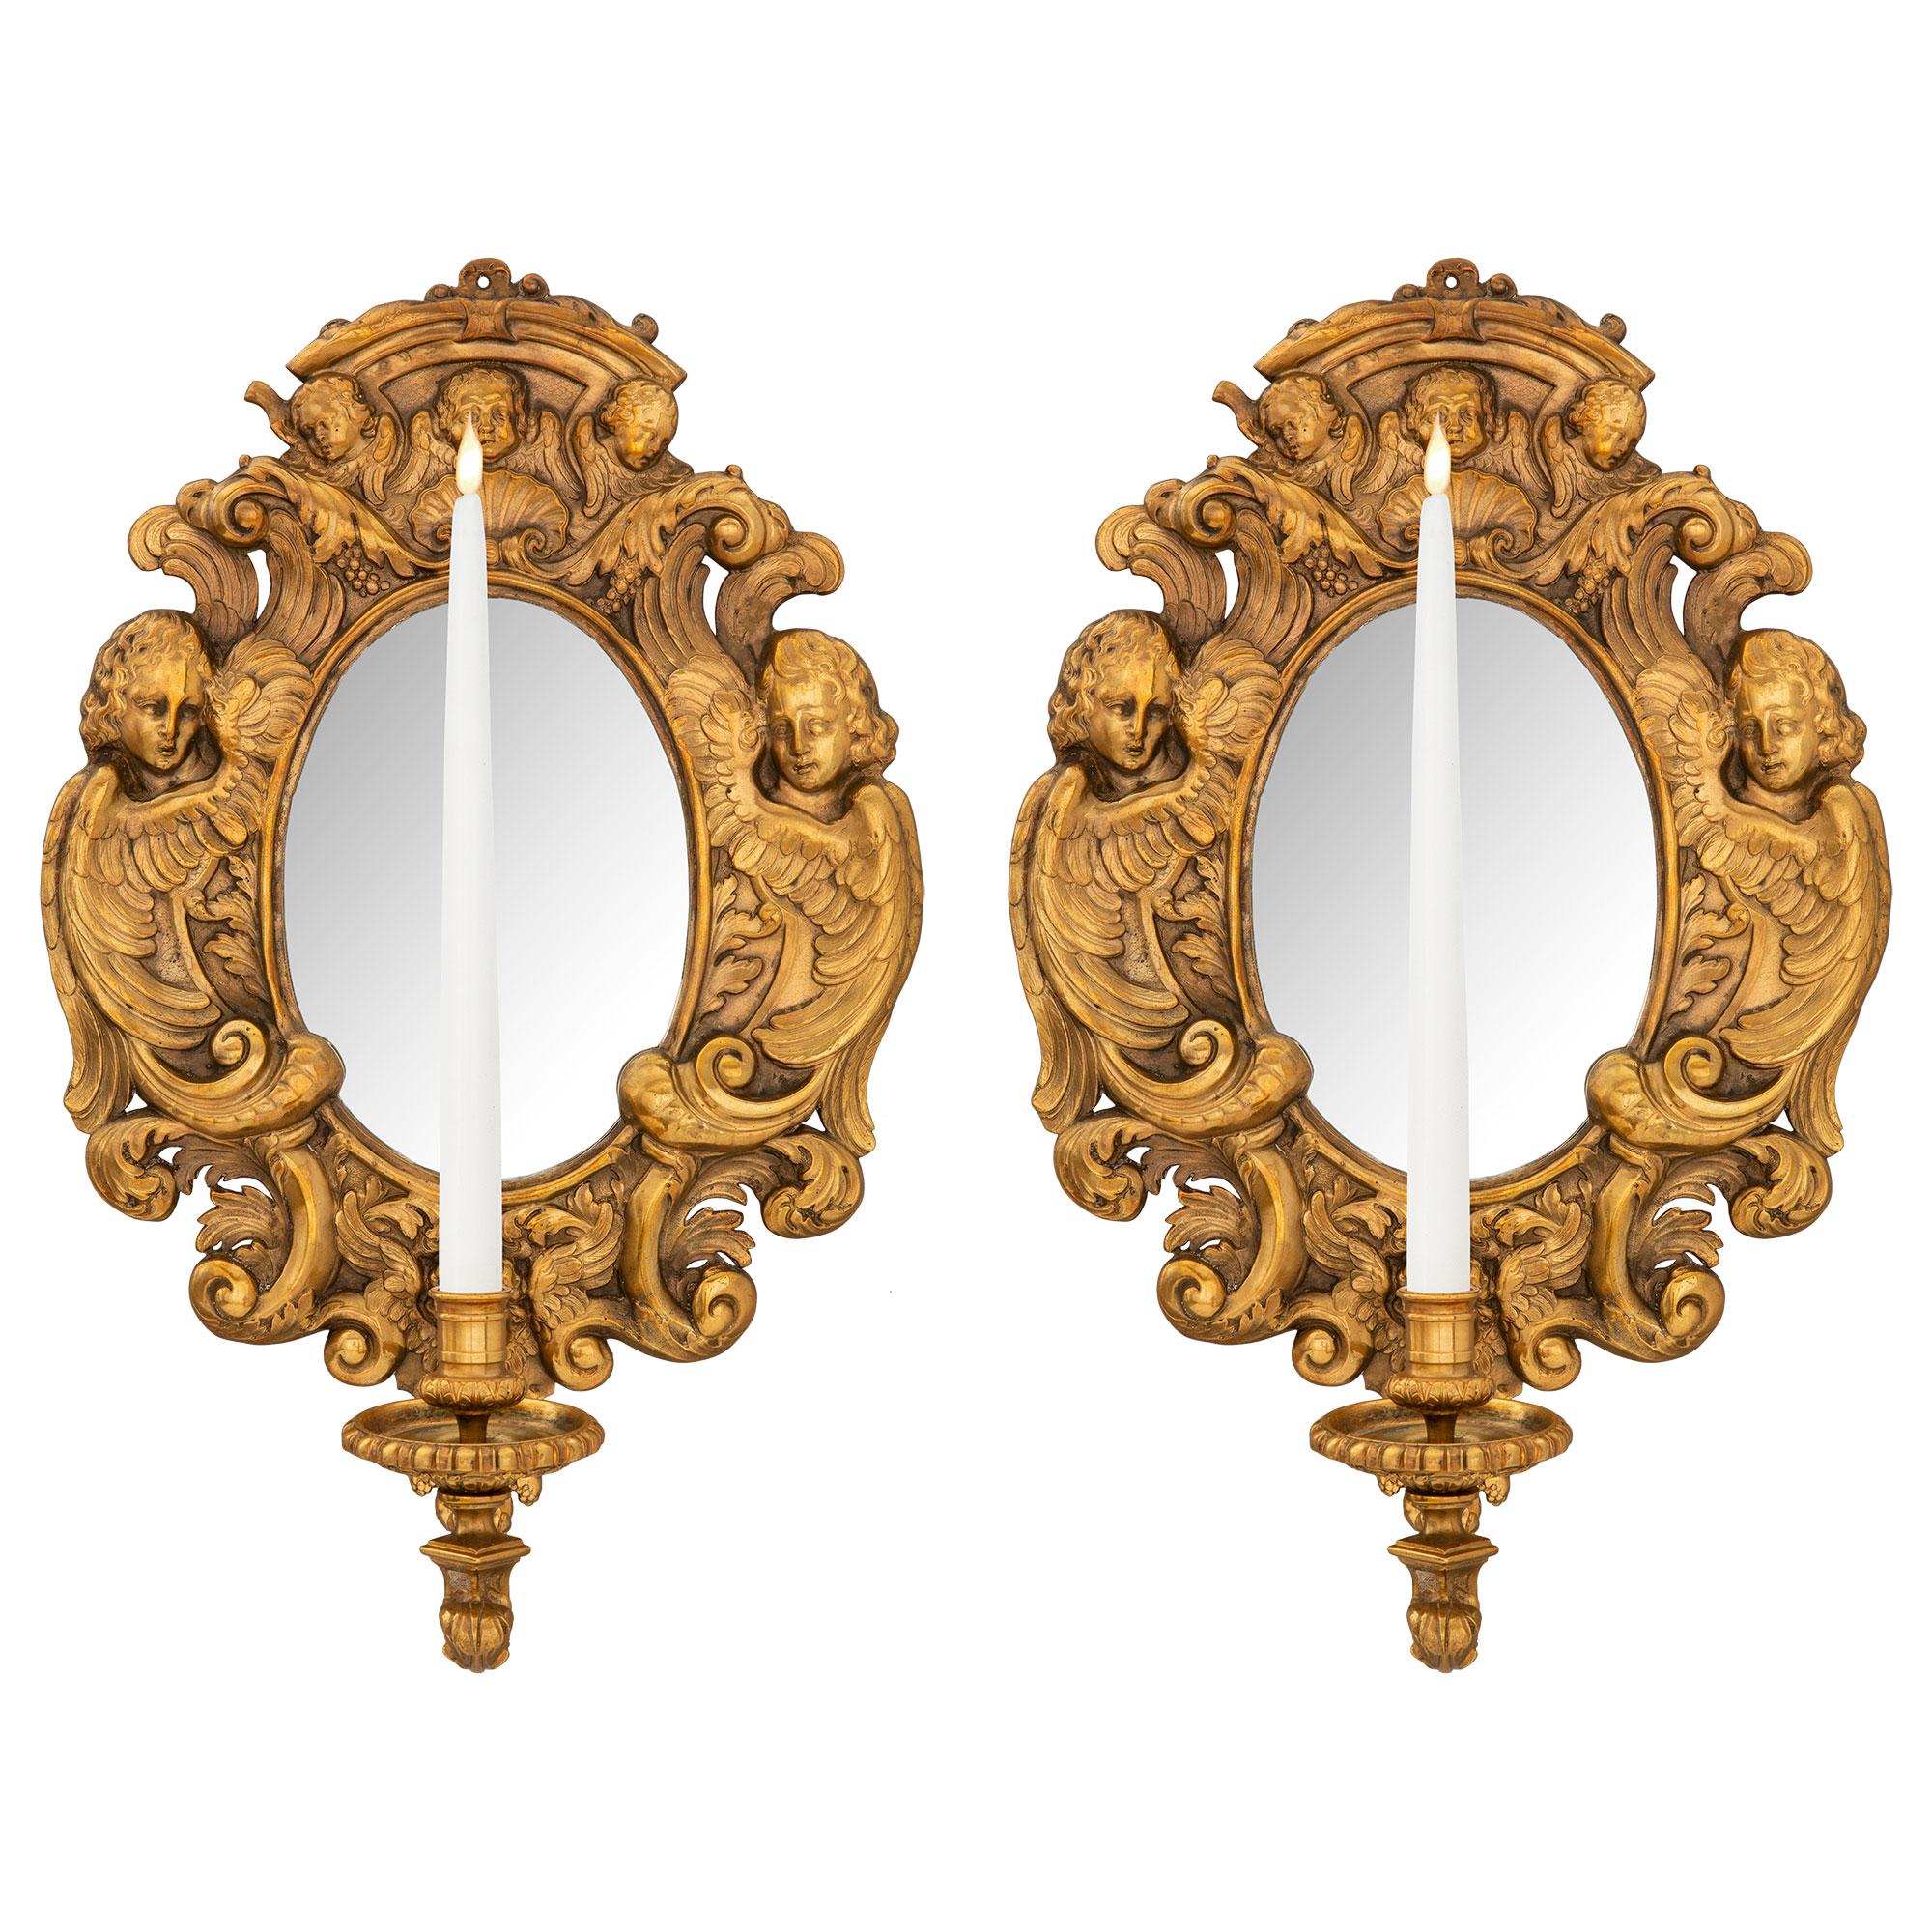 Pair of French 19th Century Baroque Style Ormolu Mirrored Sconces